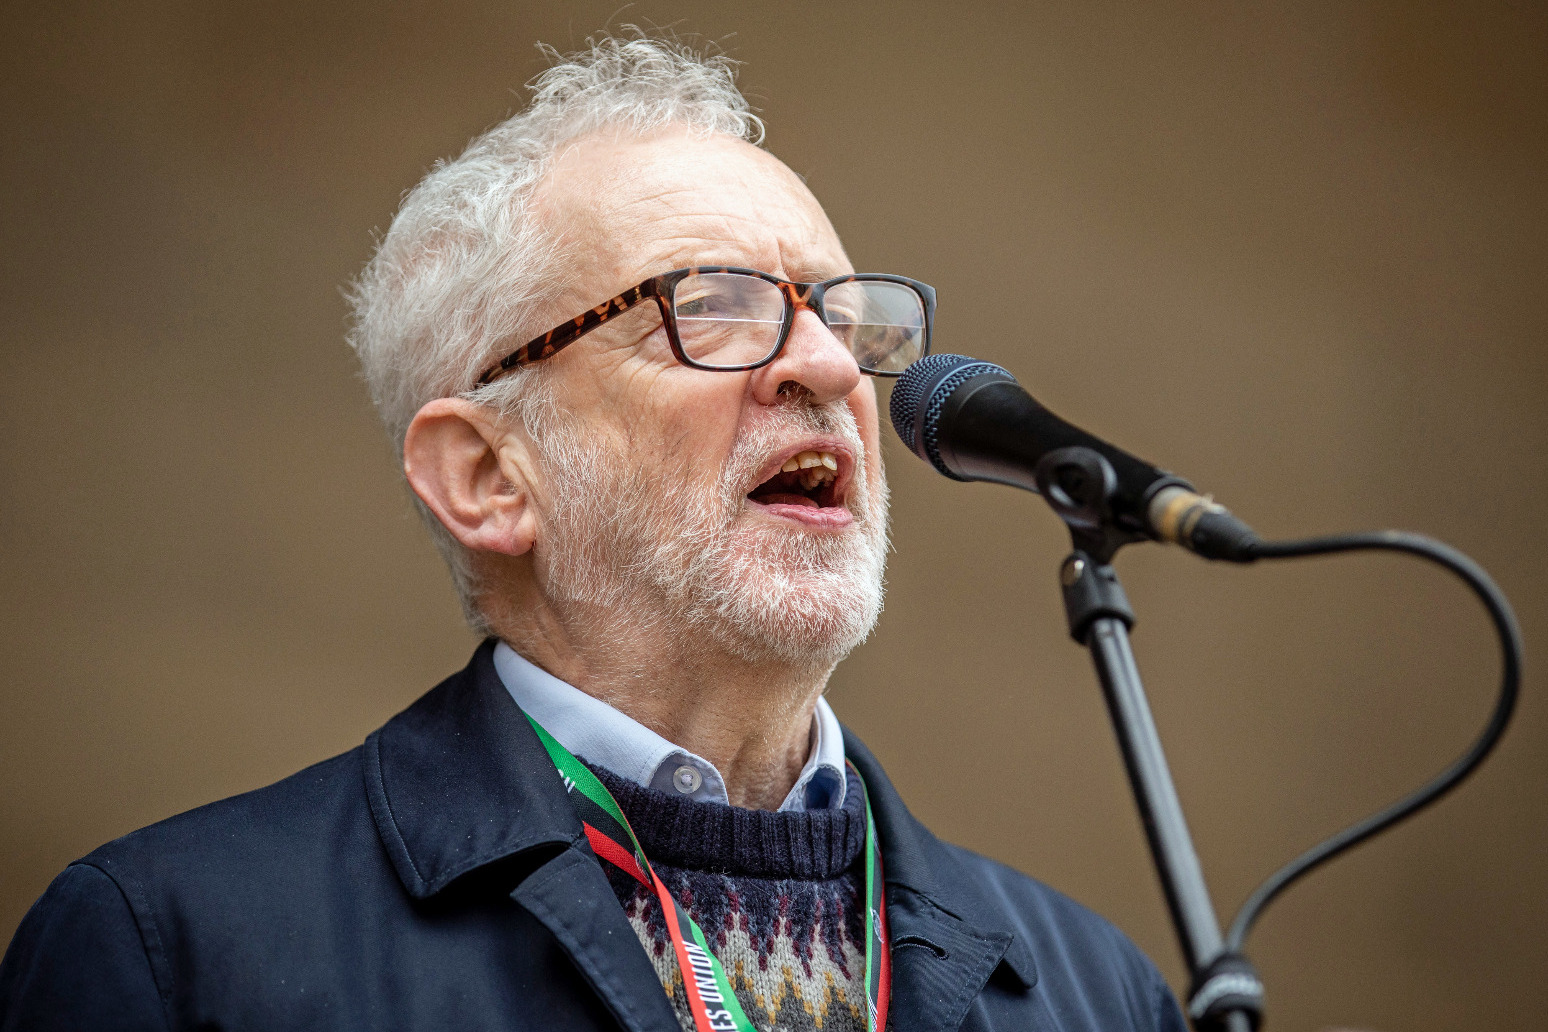 Jeremy Corbyn set to be blocked as Labour candidate at next election 